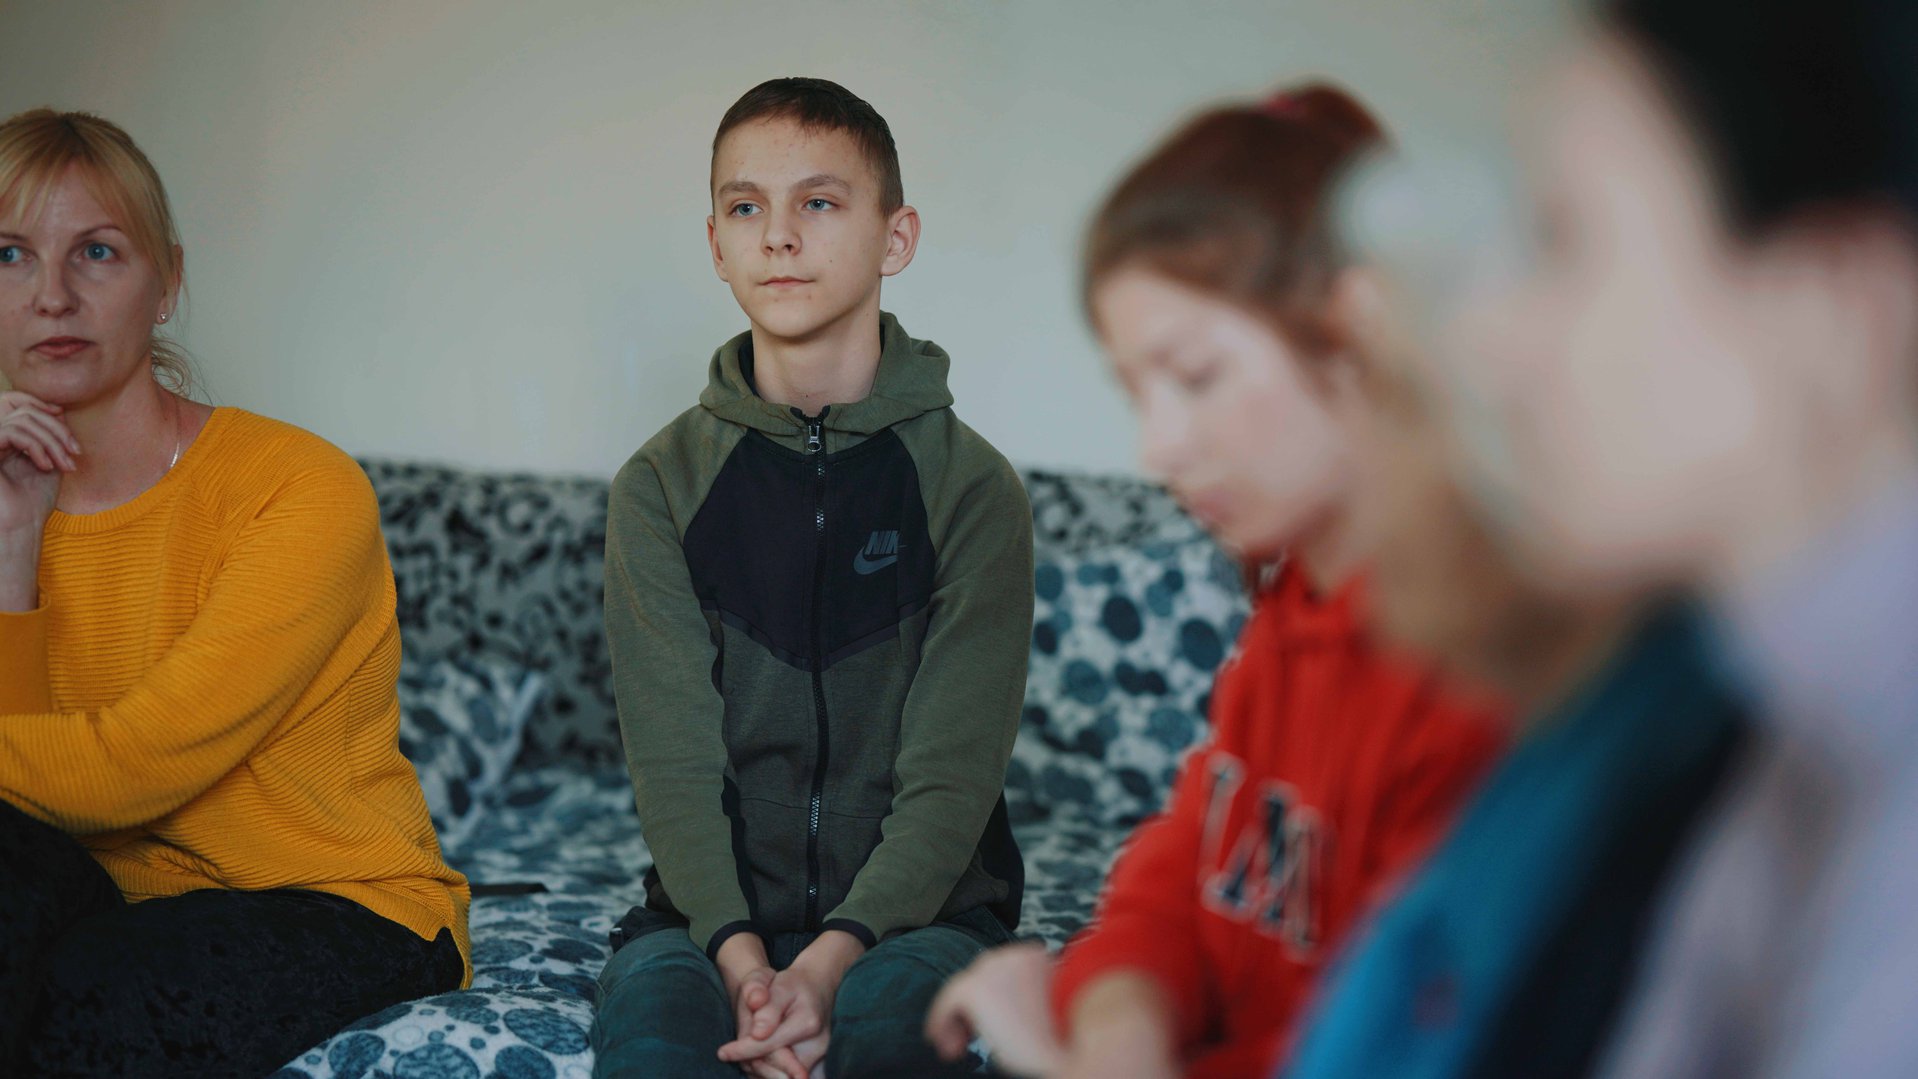 Ihor, a teenage boy from Ukraine, sitting with his family in a living room in Moldava